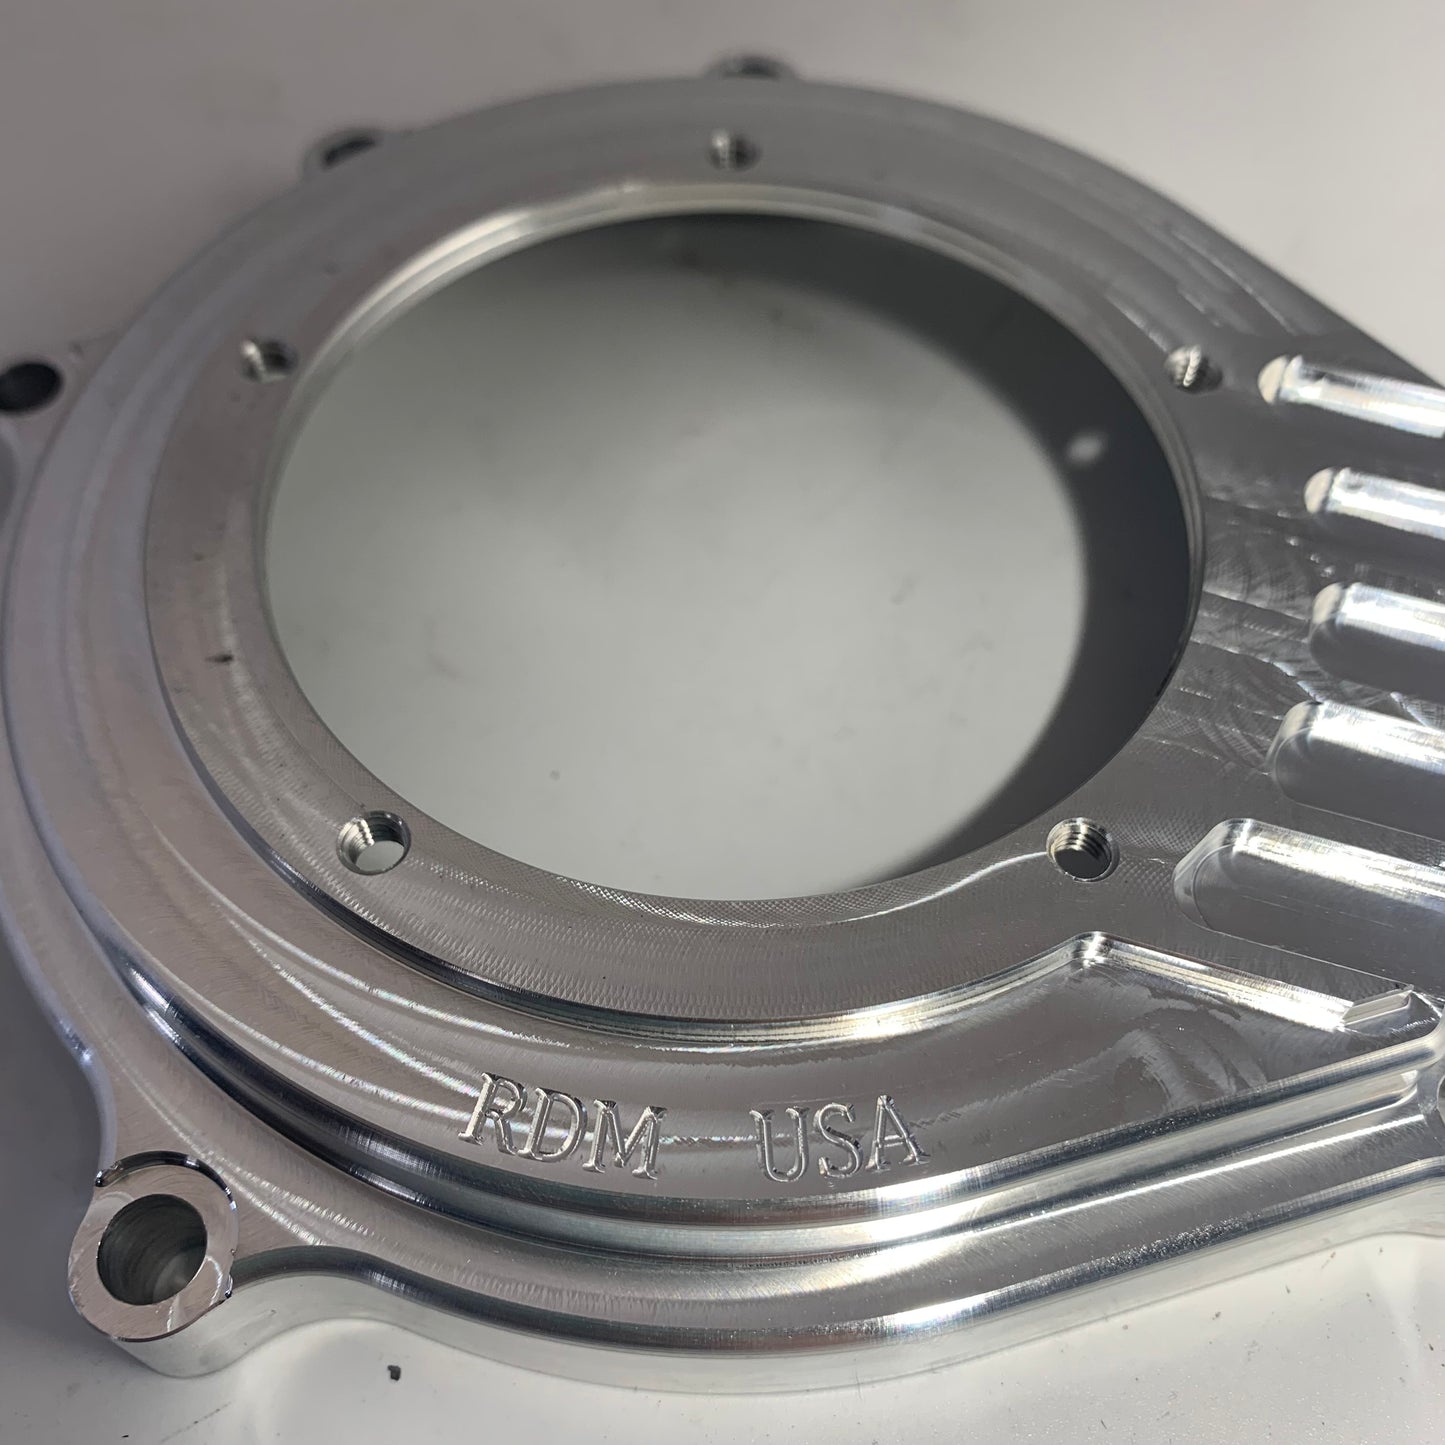 Universal Clutch Cover